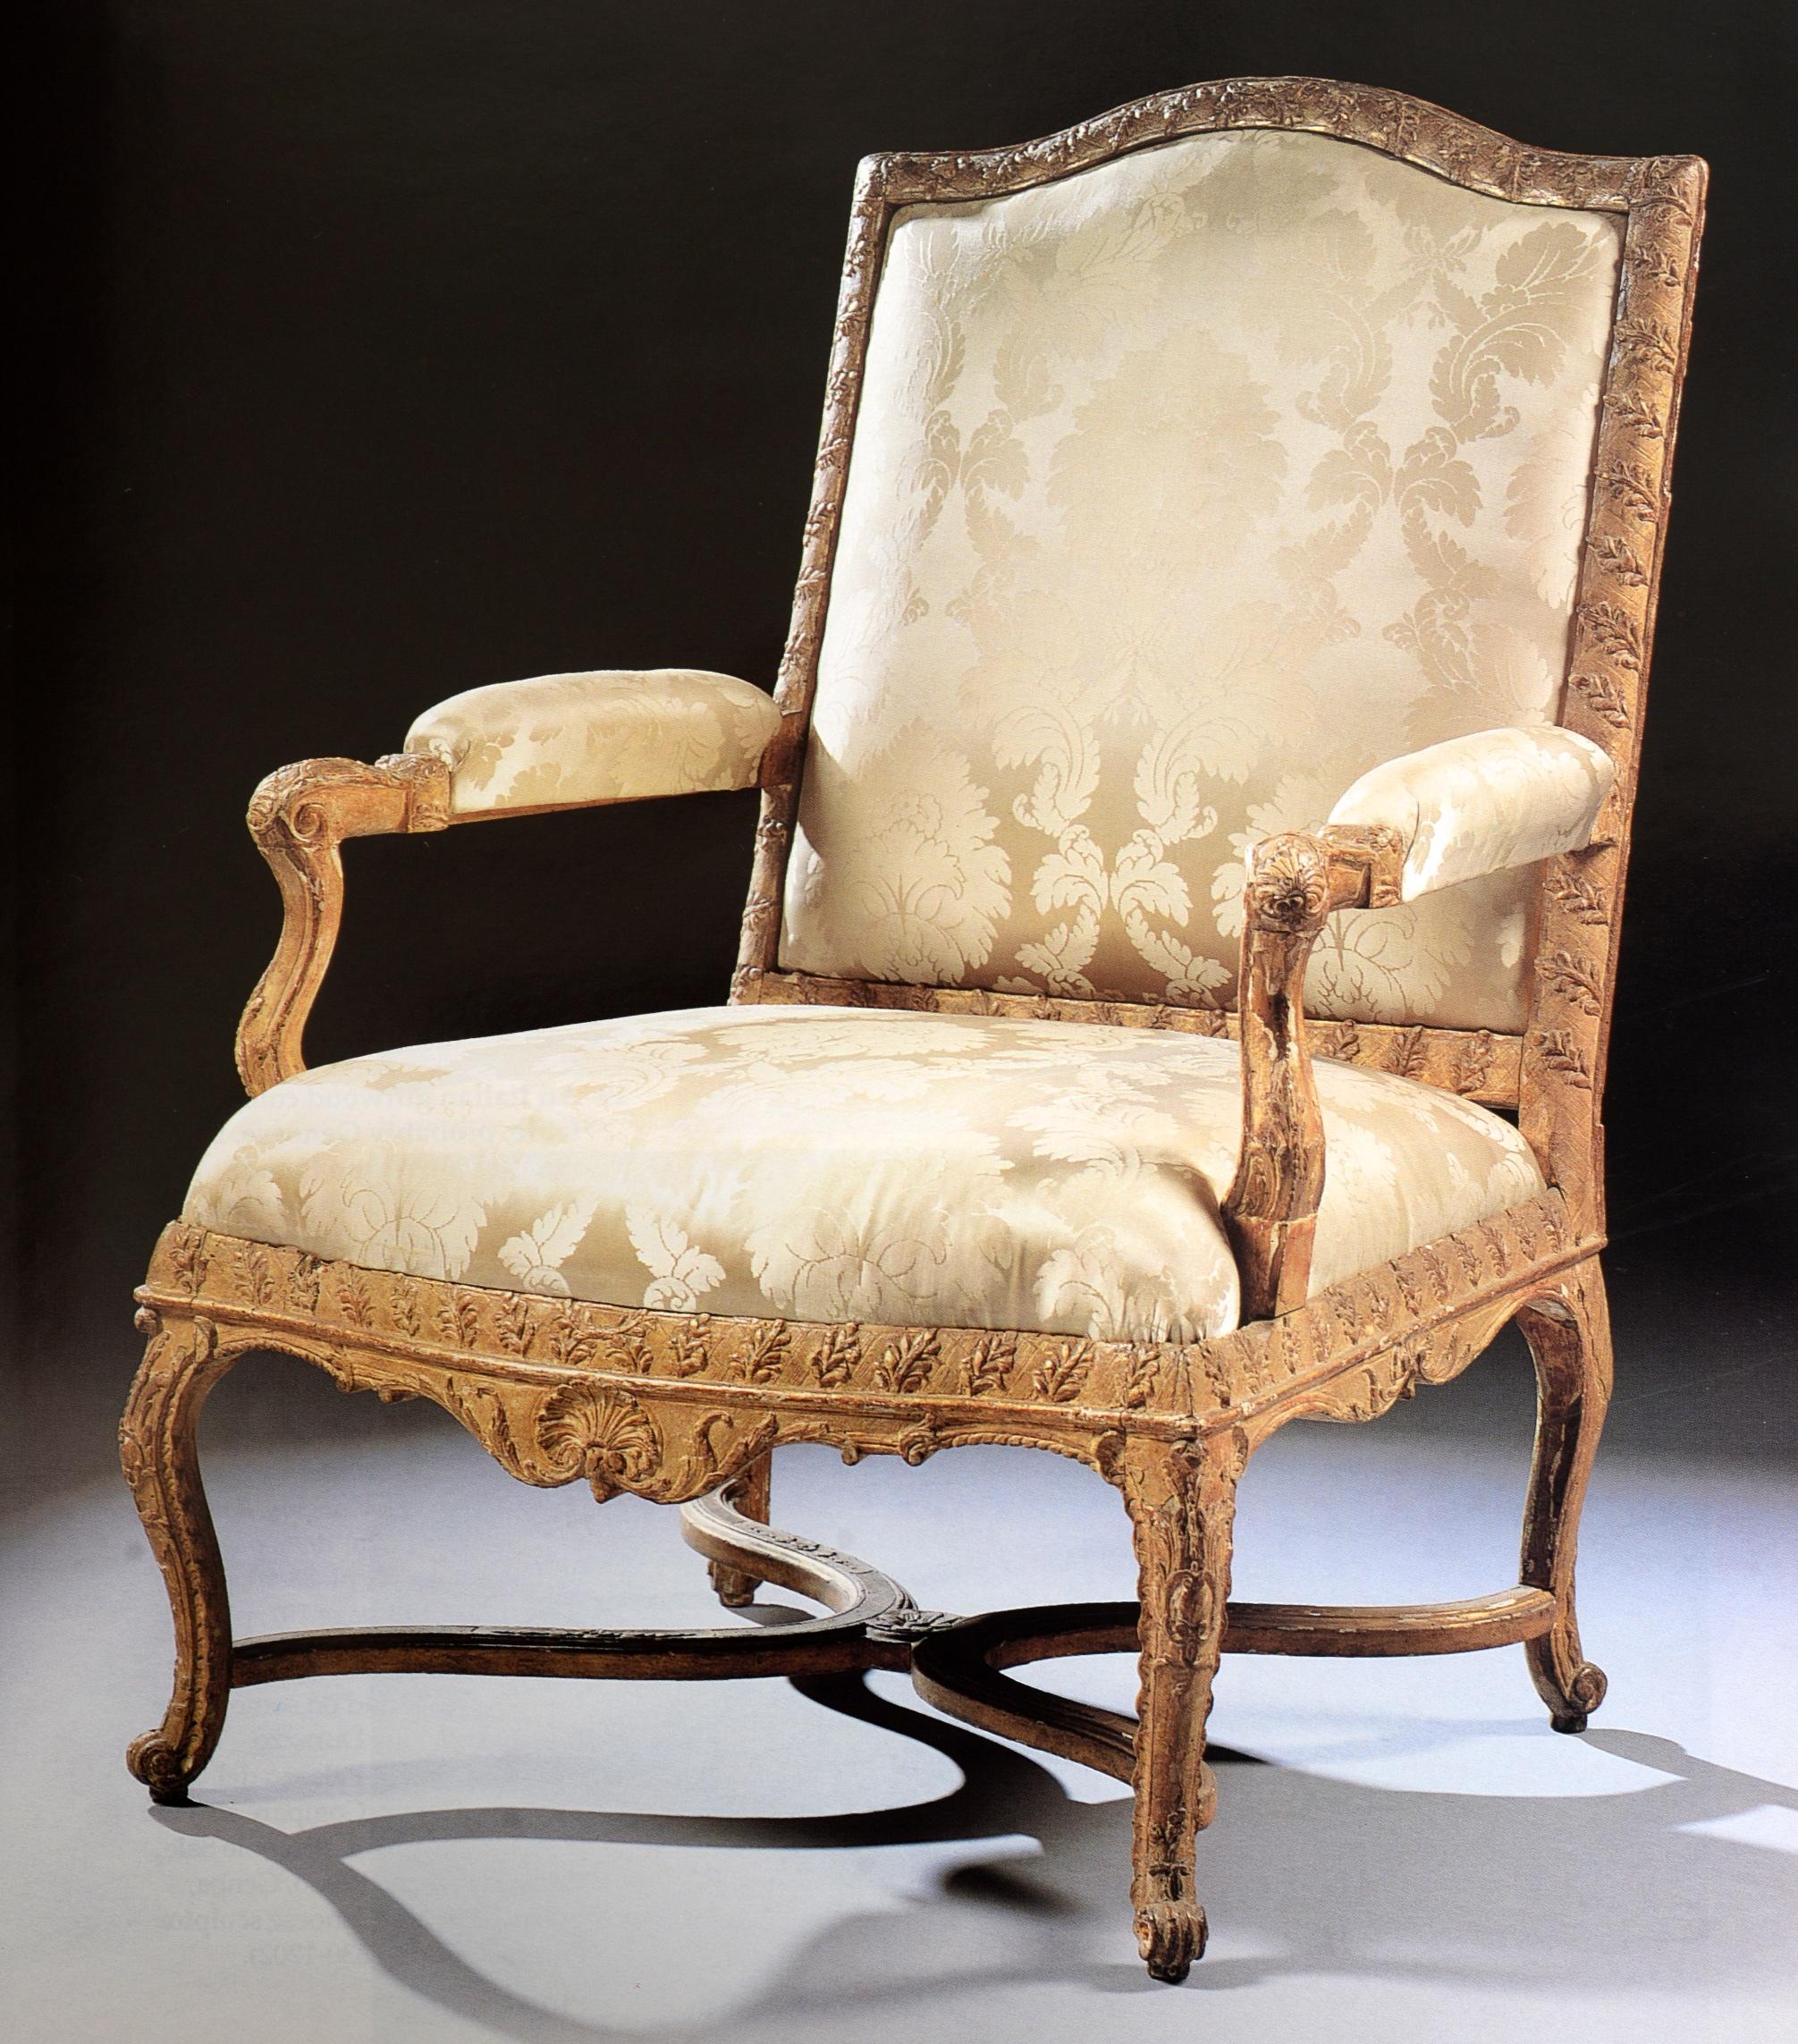 English Important Venetian, Continental Furniture and Tapestries, Sotheby's, 1998